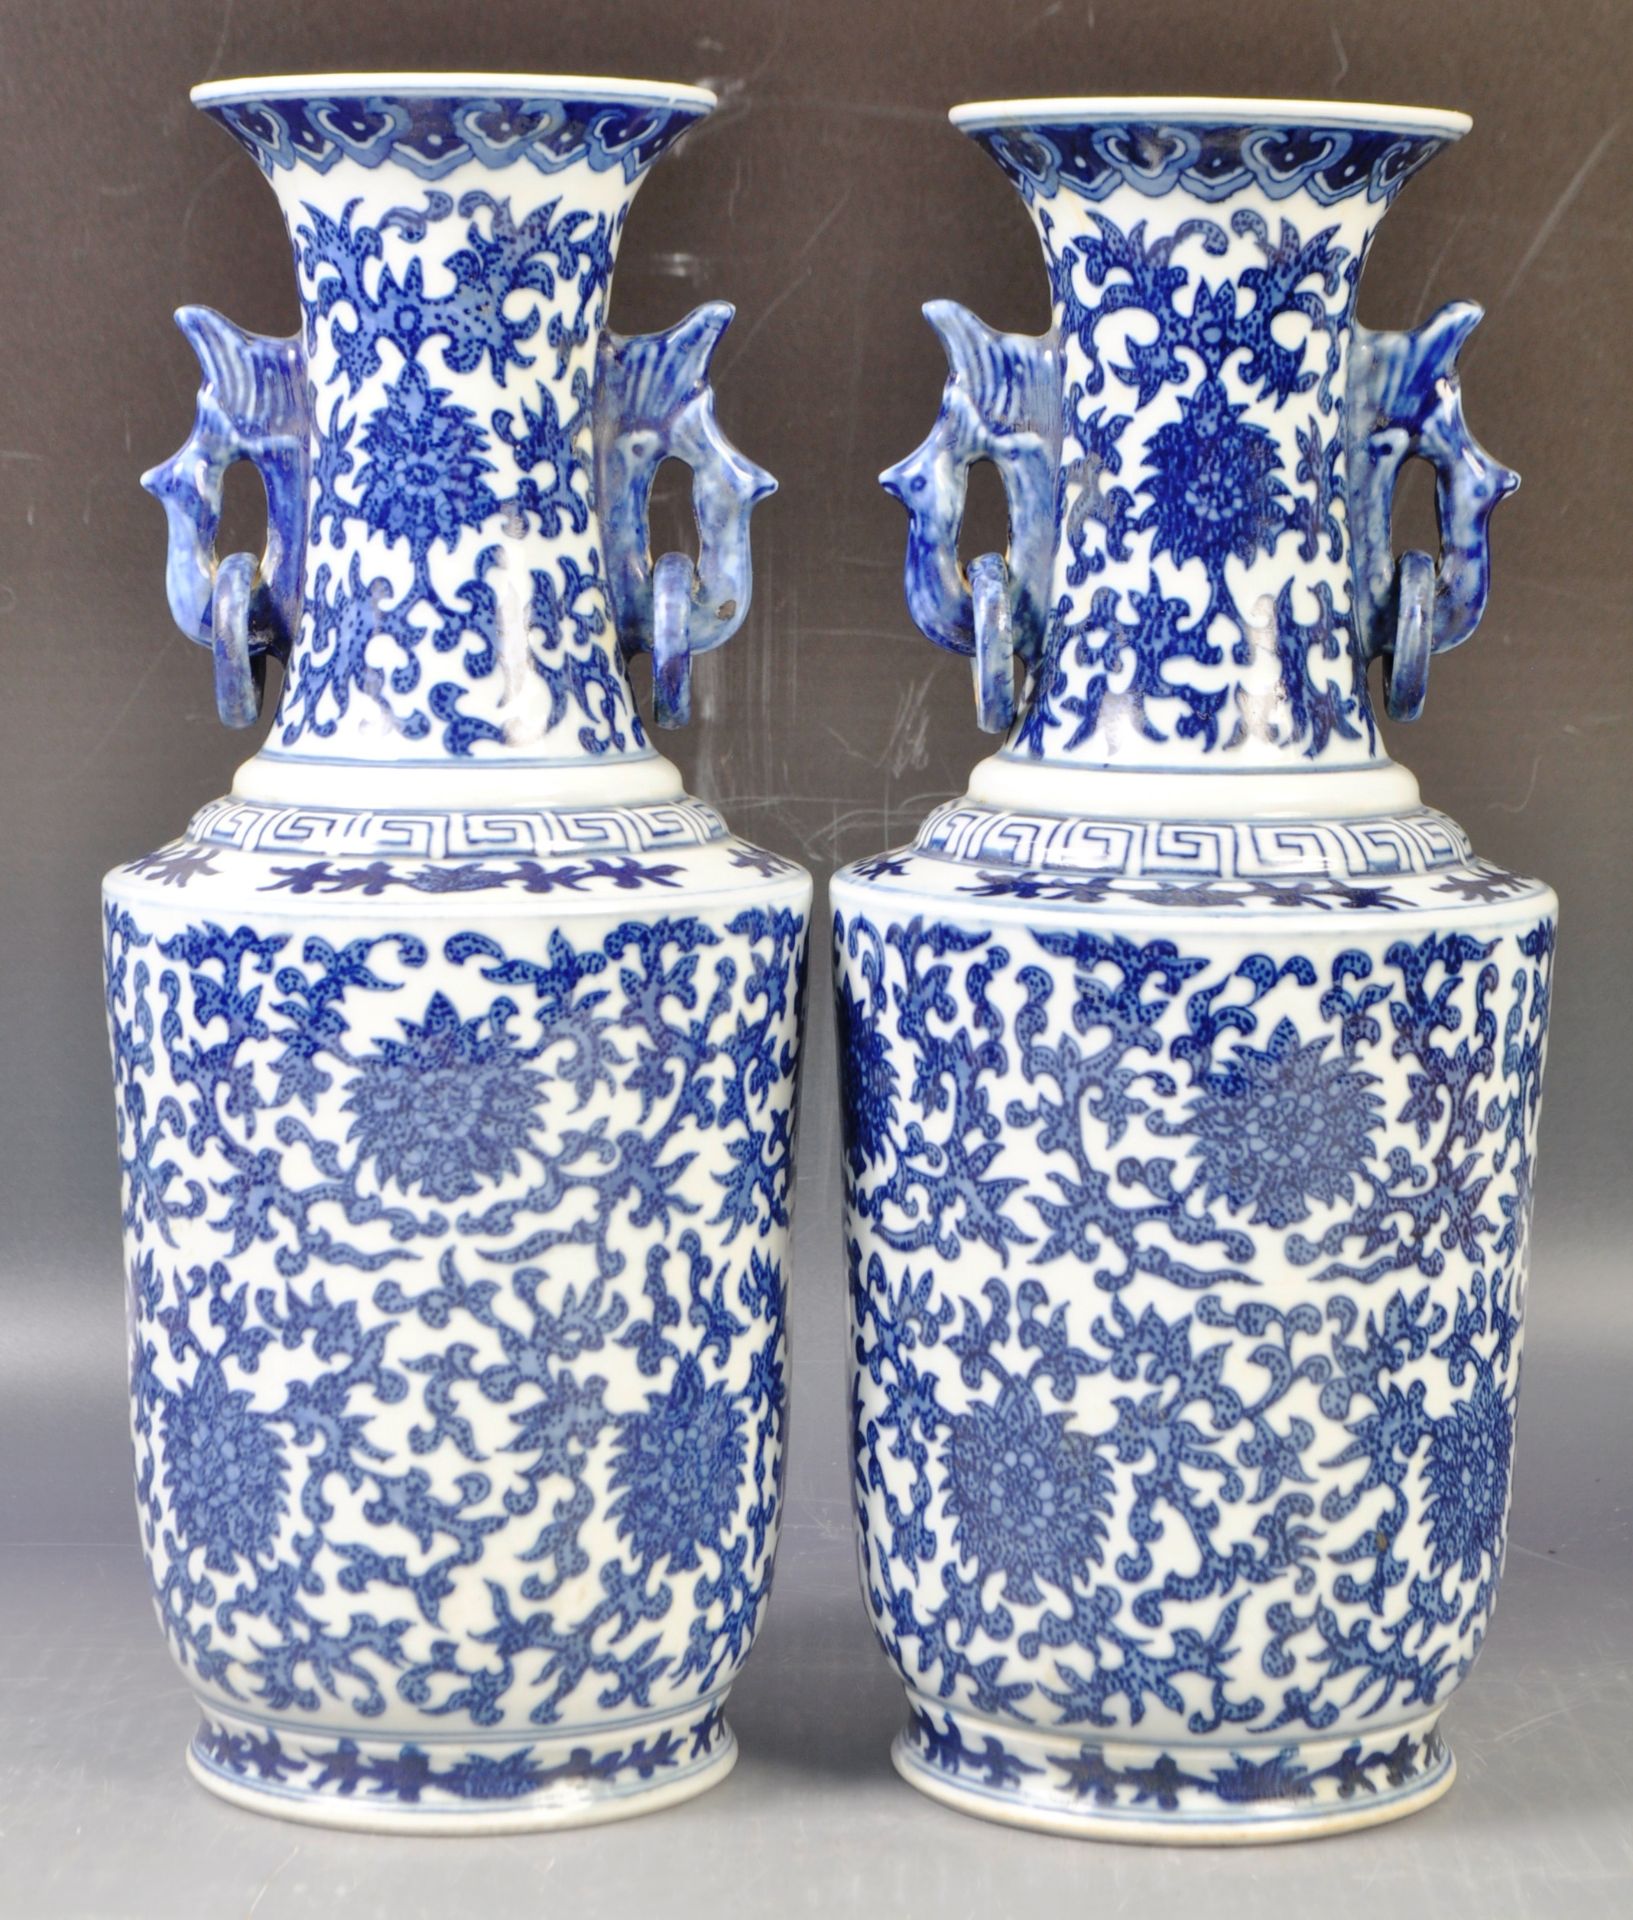 PAIR OF CHINESE QIANLONG MARK PORCELAIN BLUE AND WHITE VASES